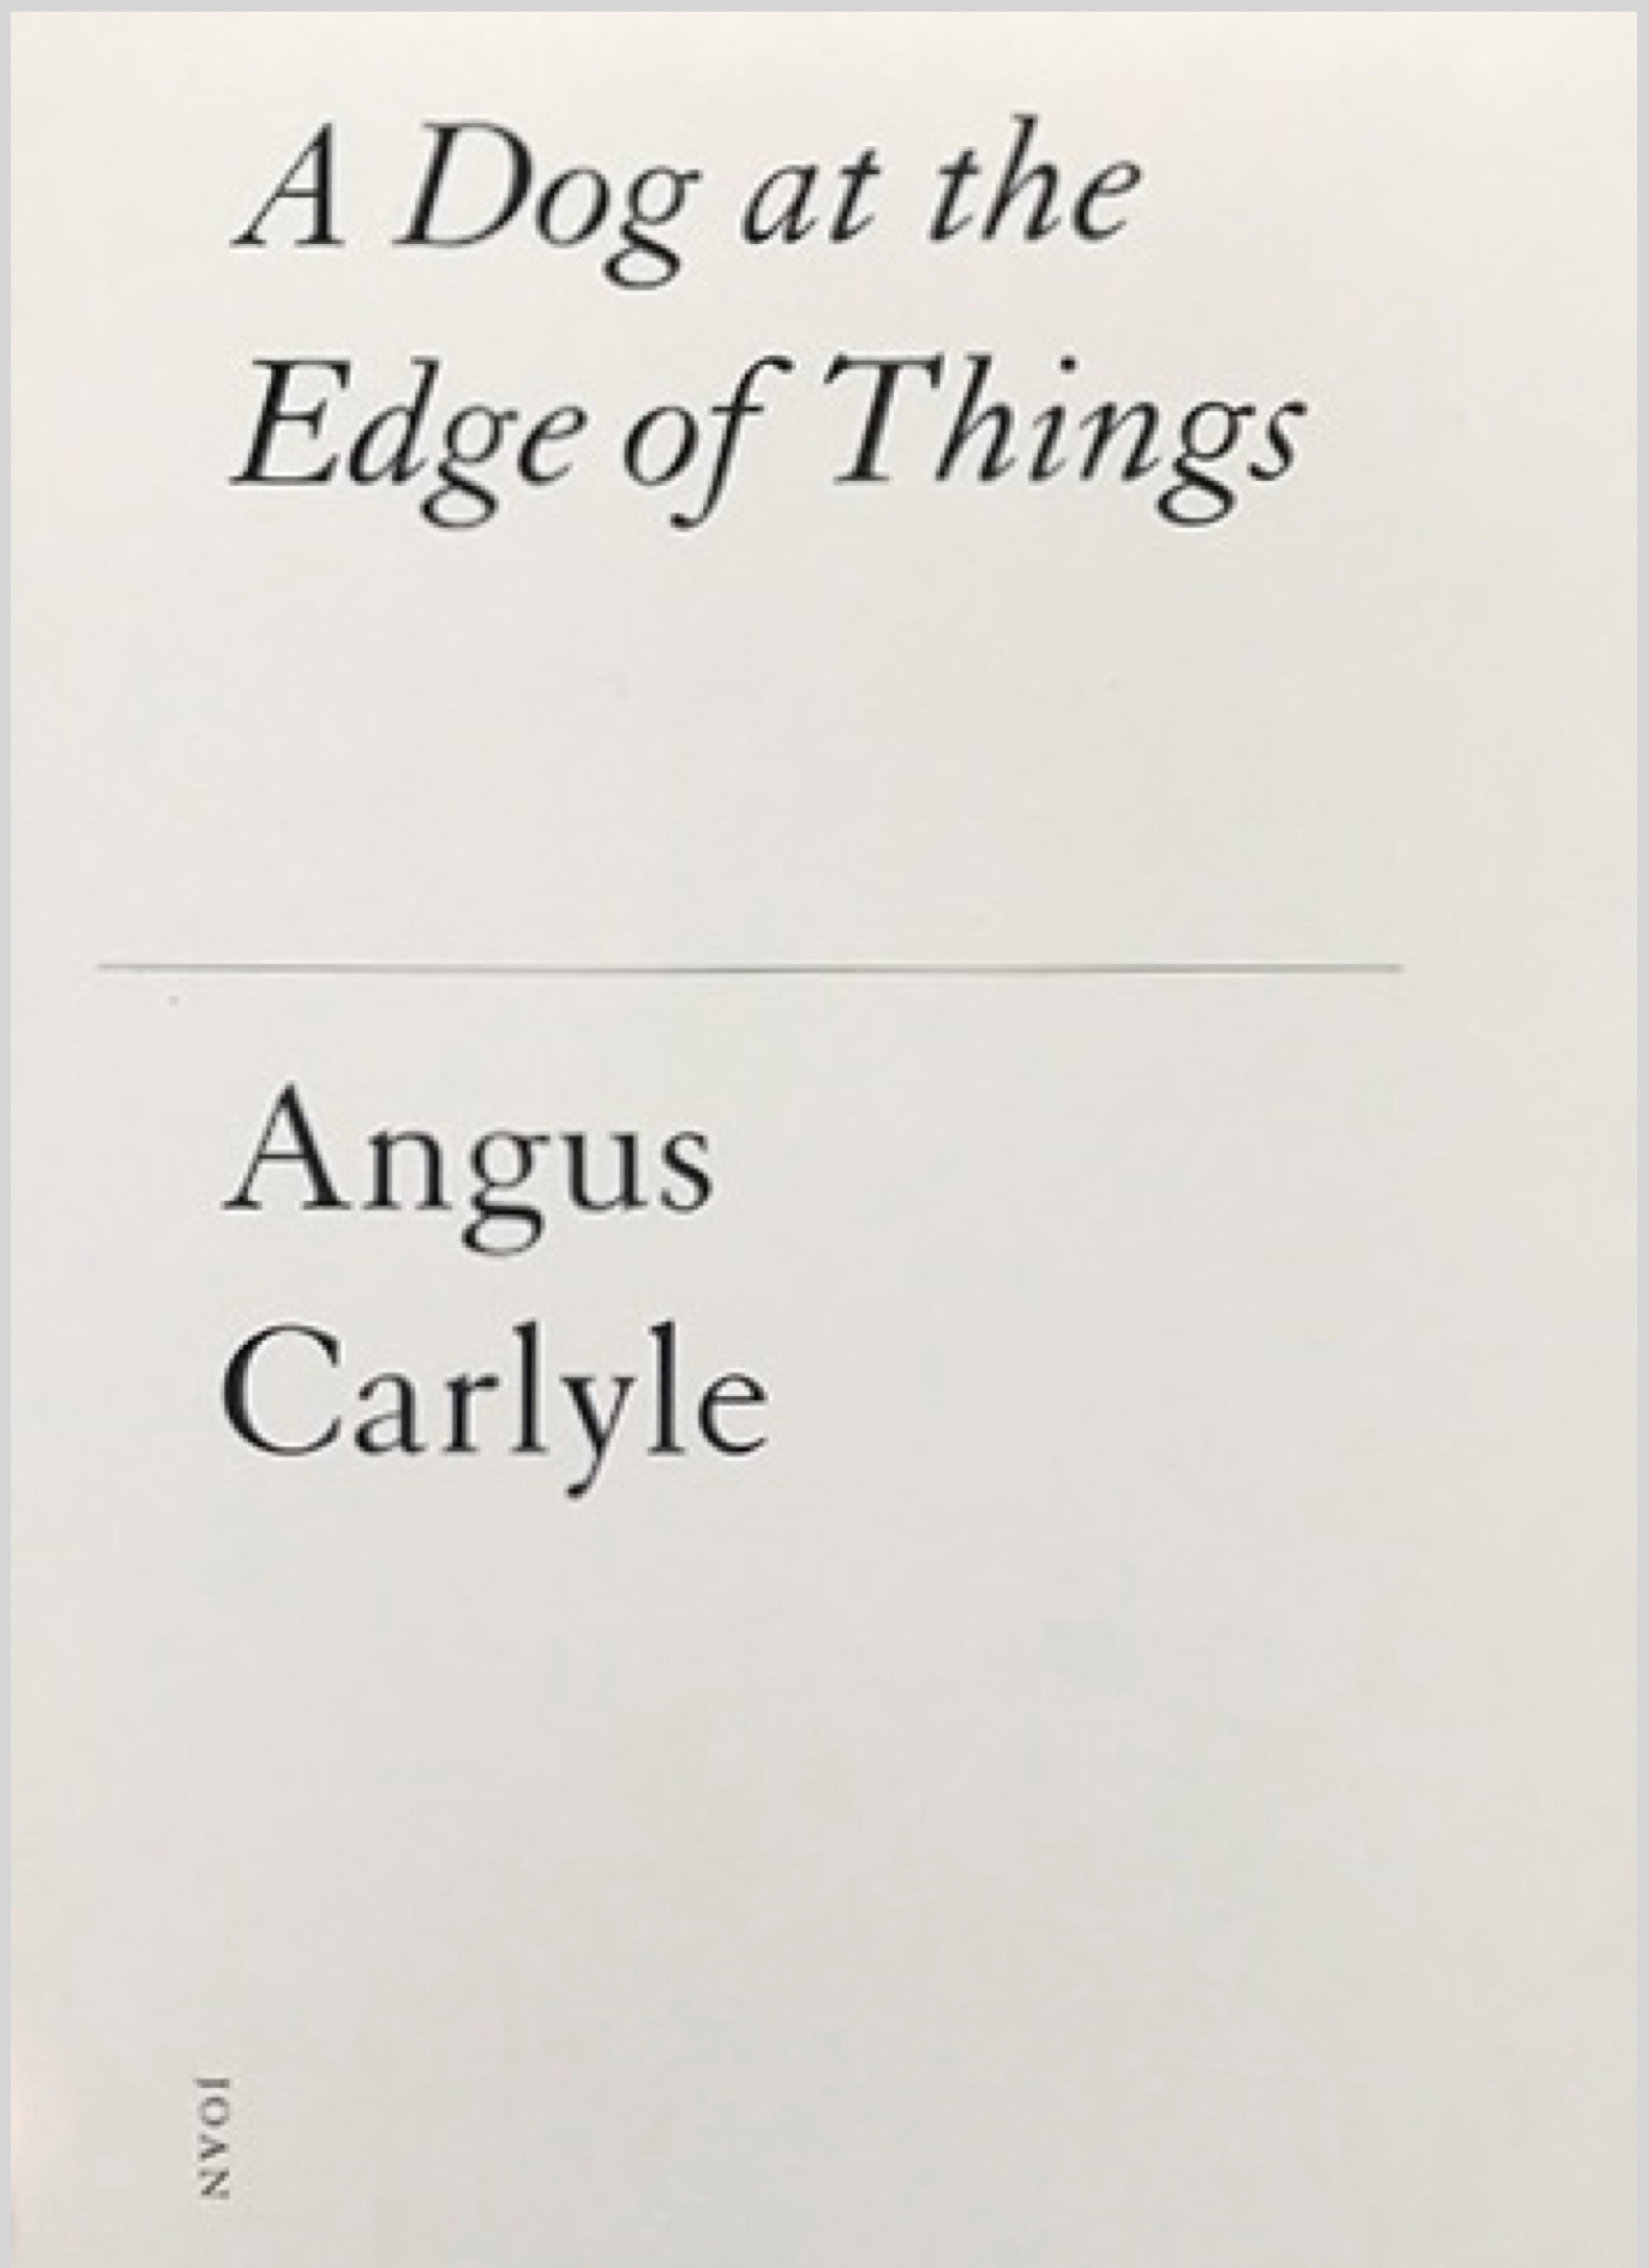 21 YEARS OF FIELD NOTES: David Berridge reviews ‘A Dog at the Edge of Things’ by Angus Carlyle